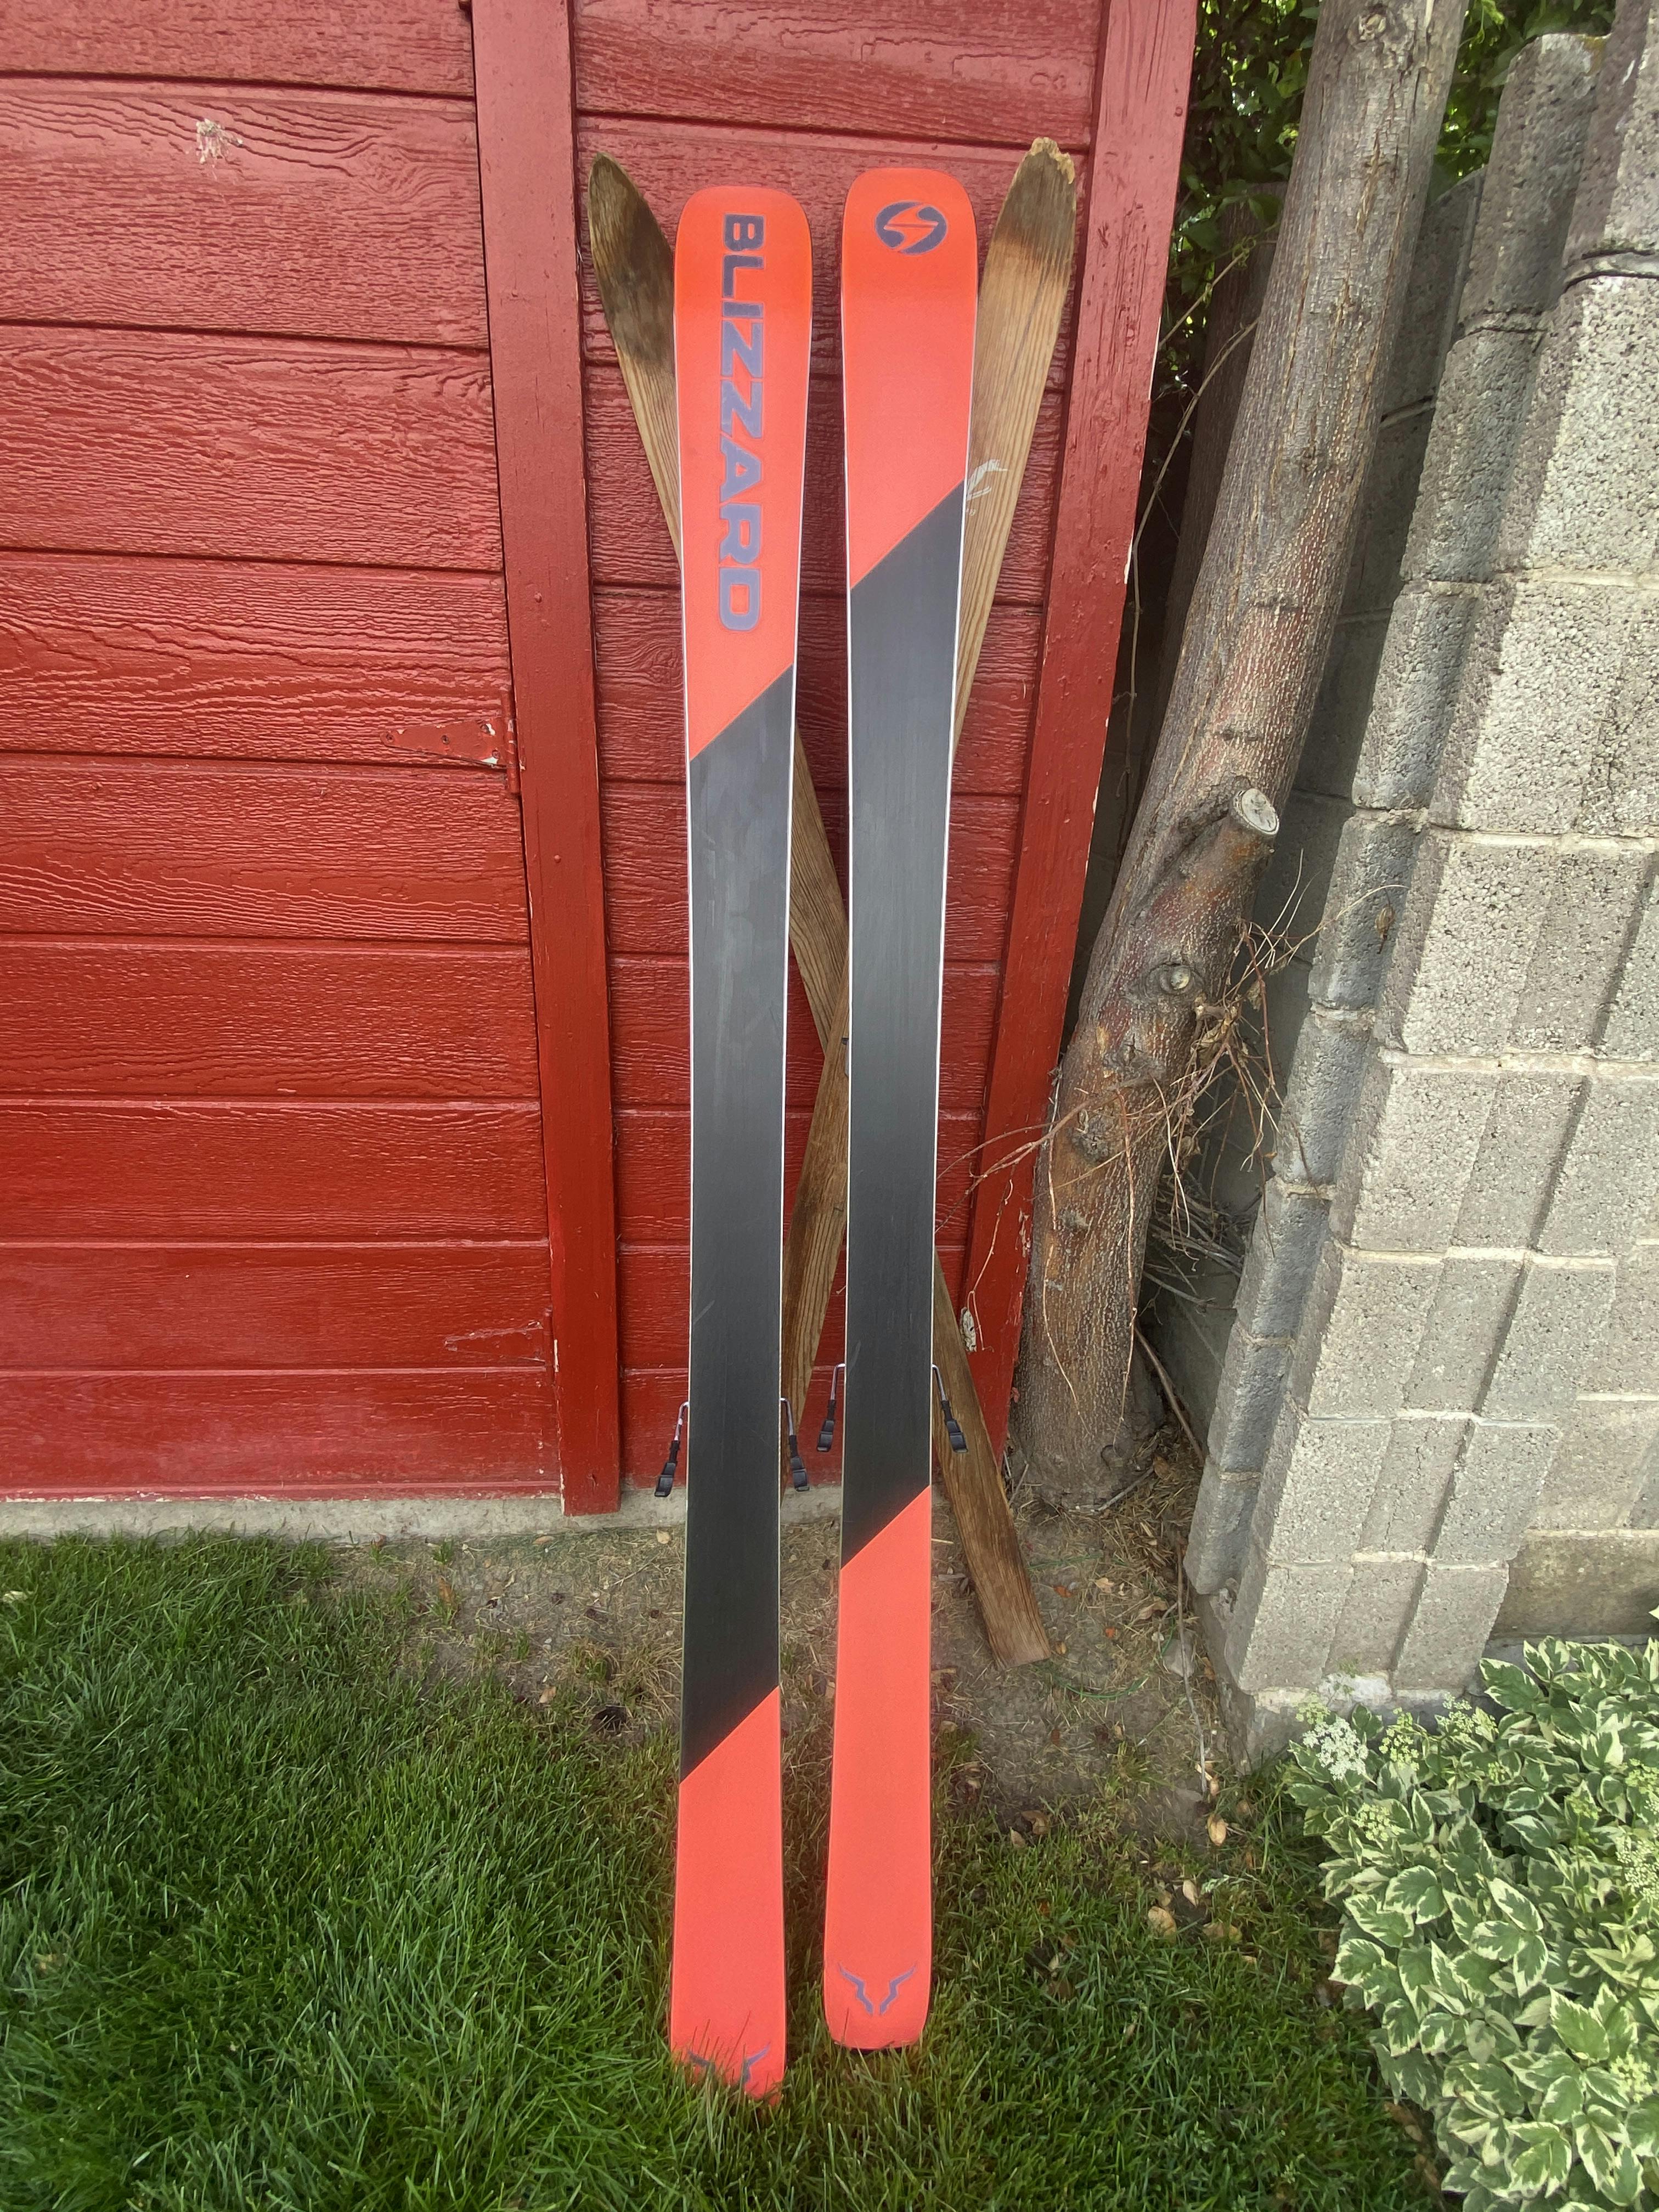 The bottom of the Blizzard Brahma 88 skis.